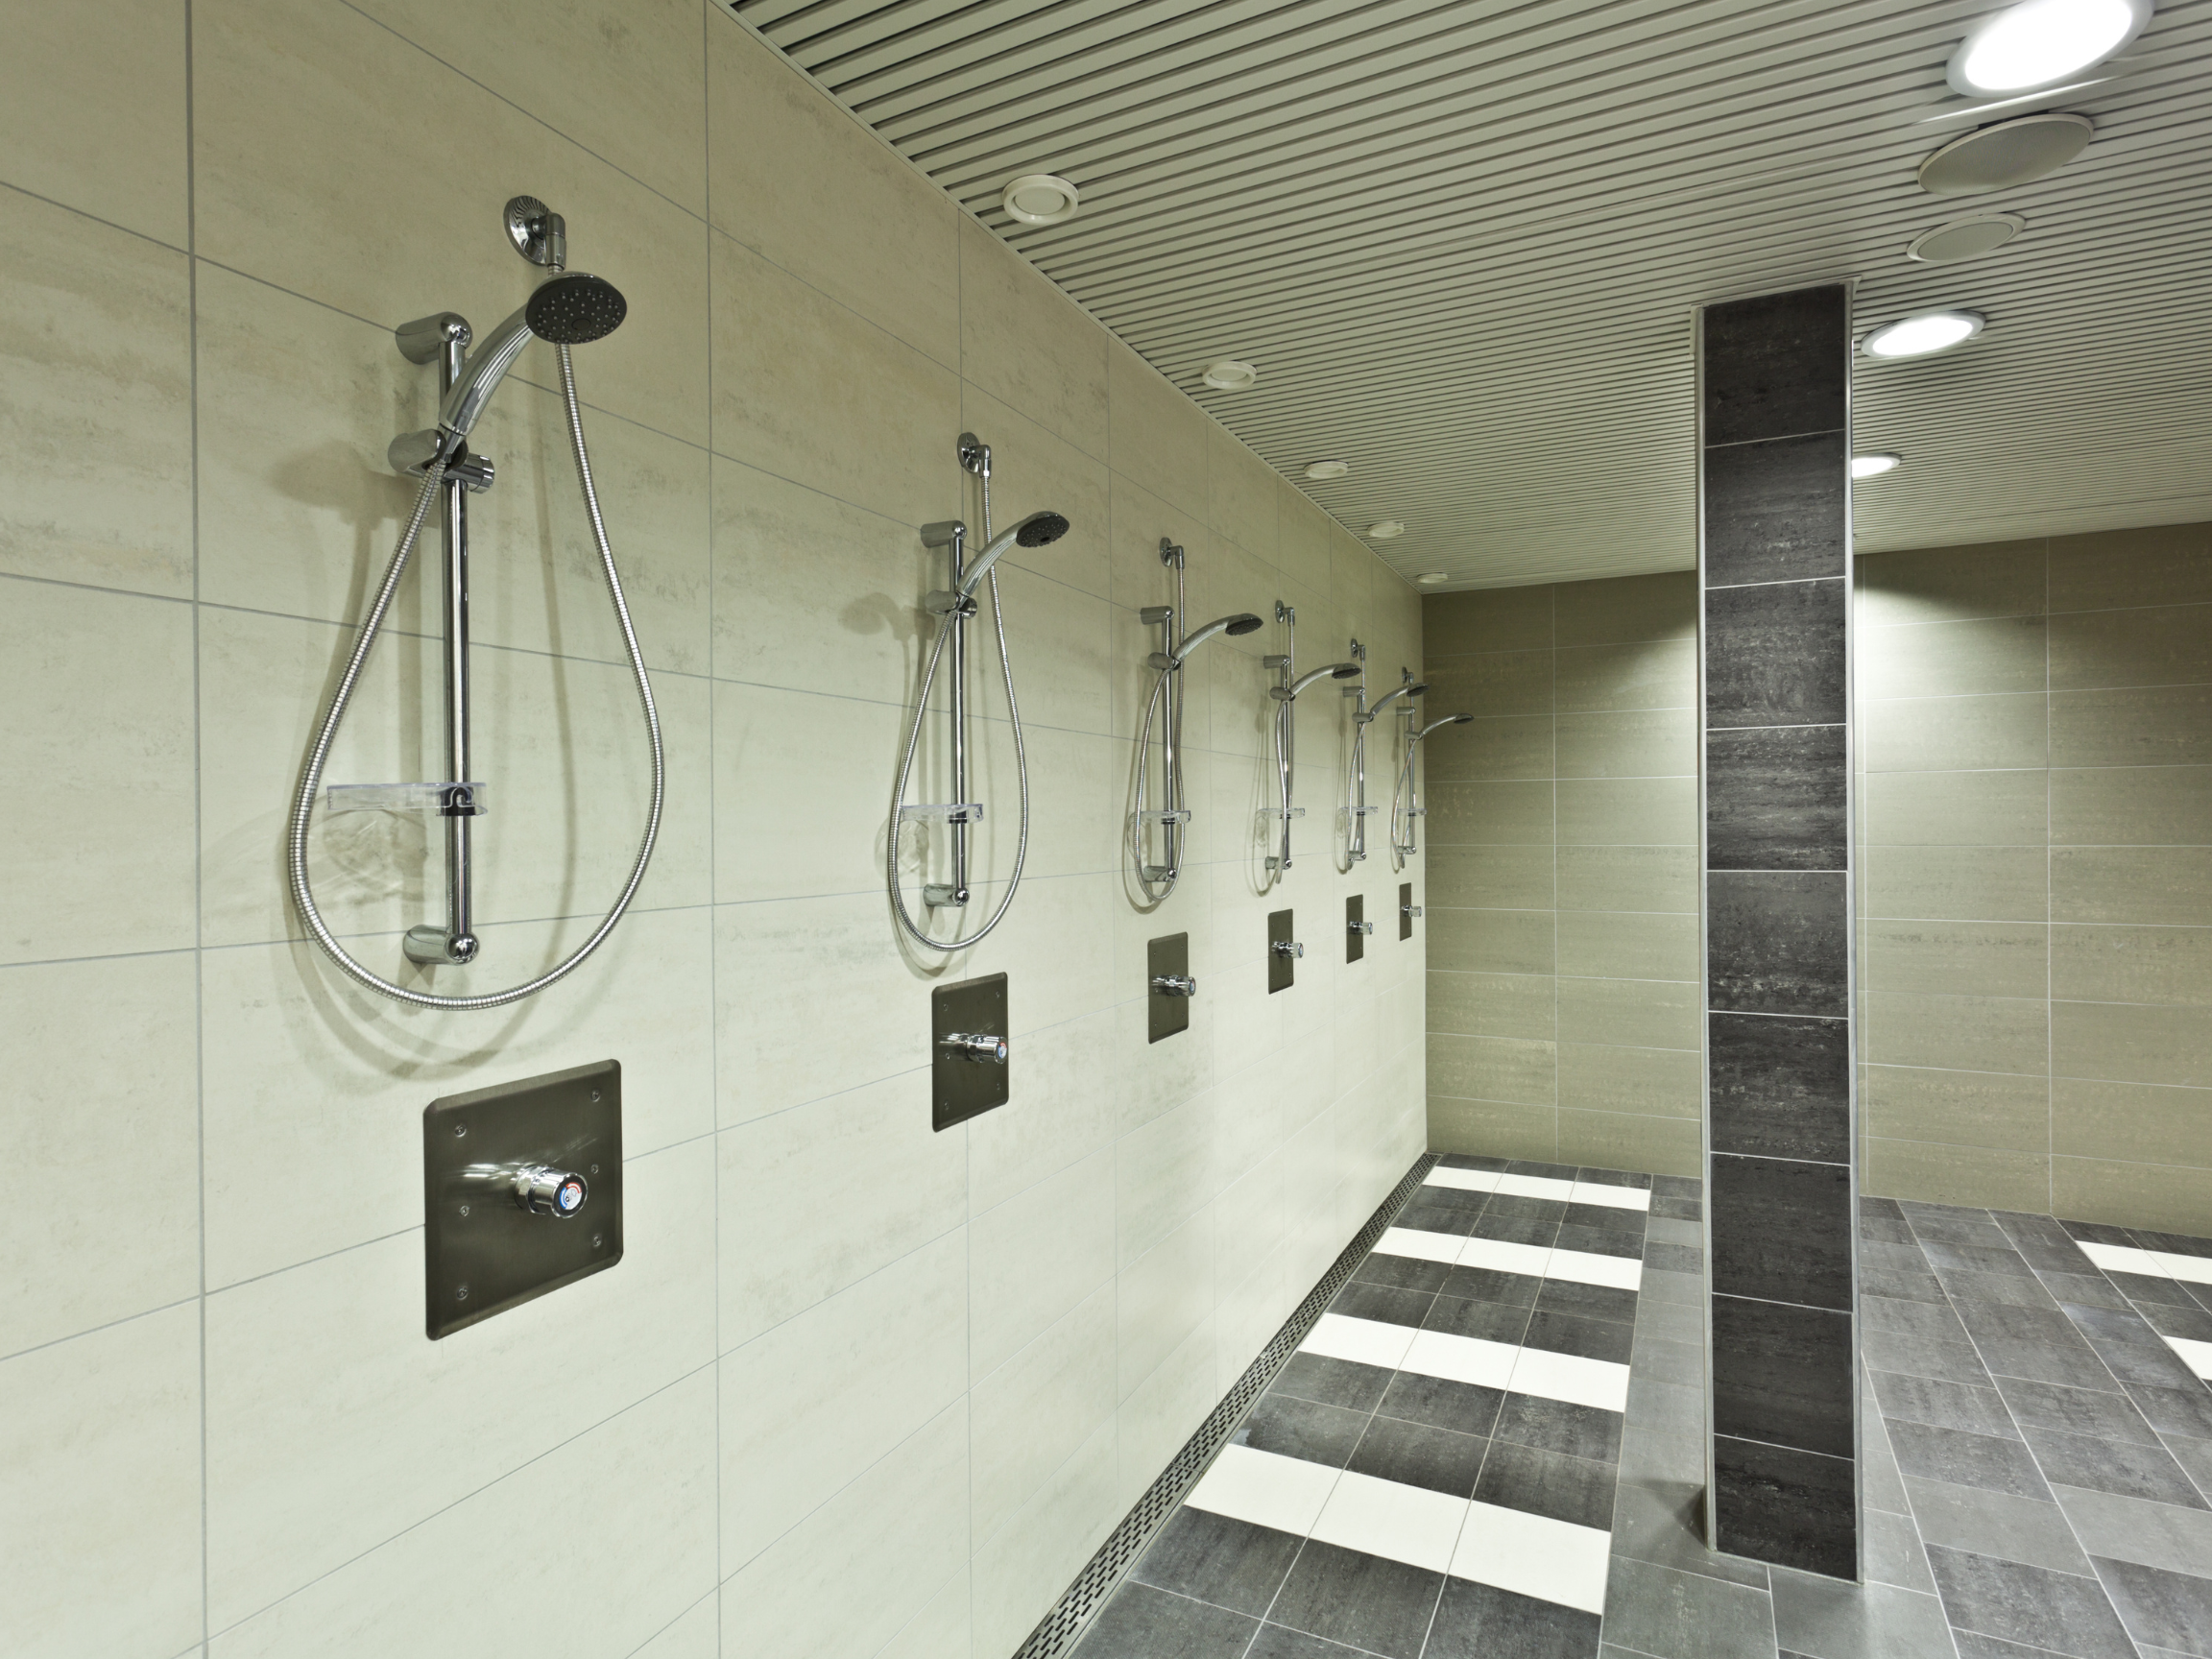 showering in a public gym shower facility